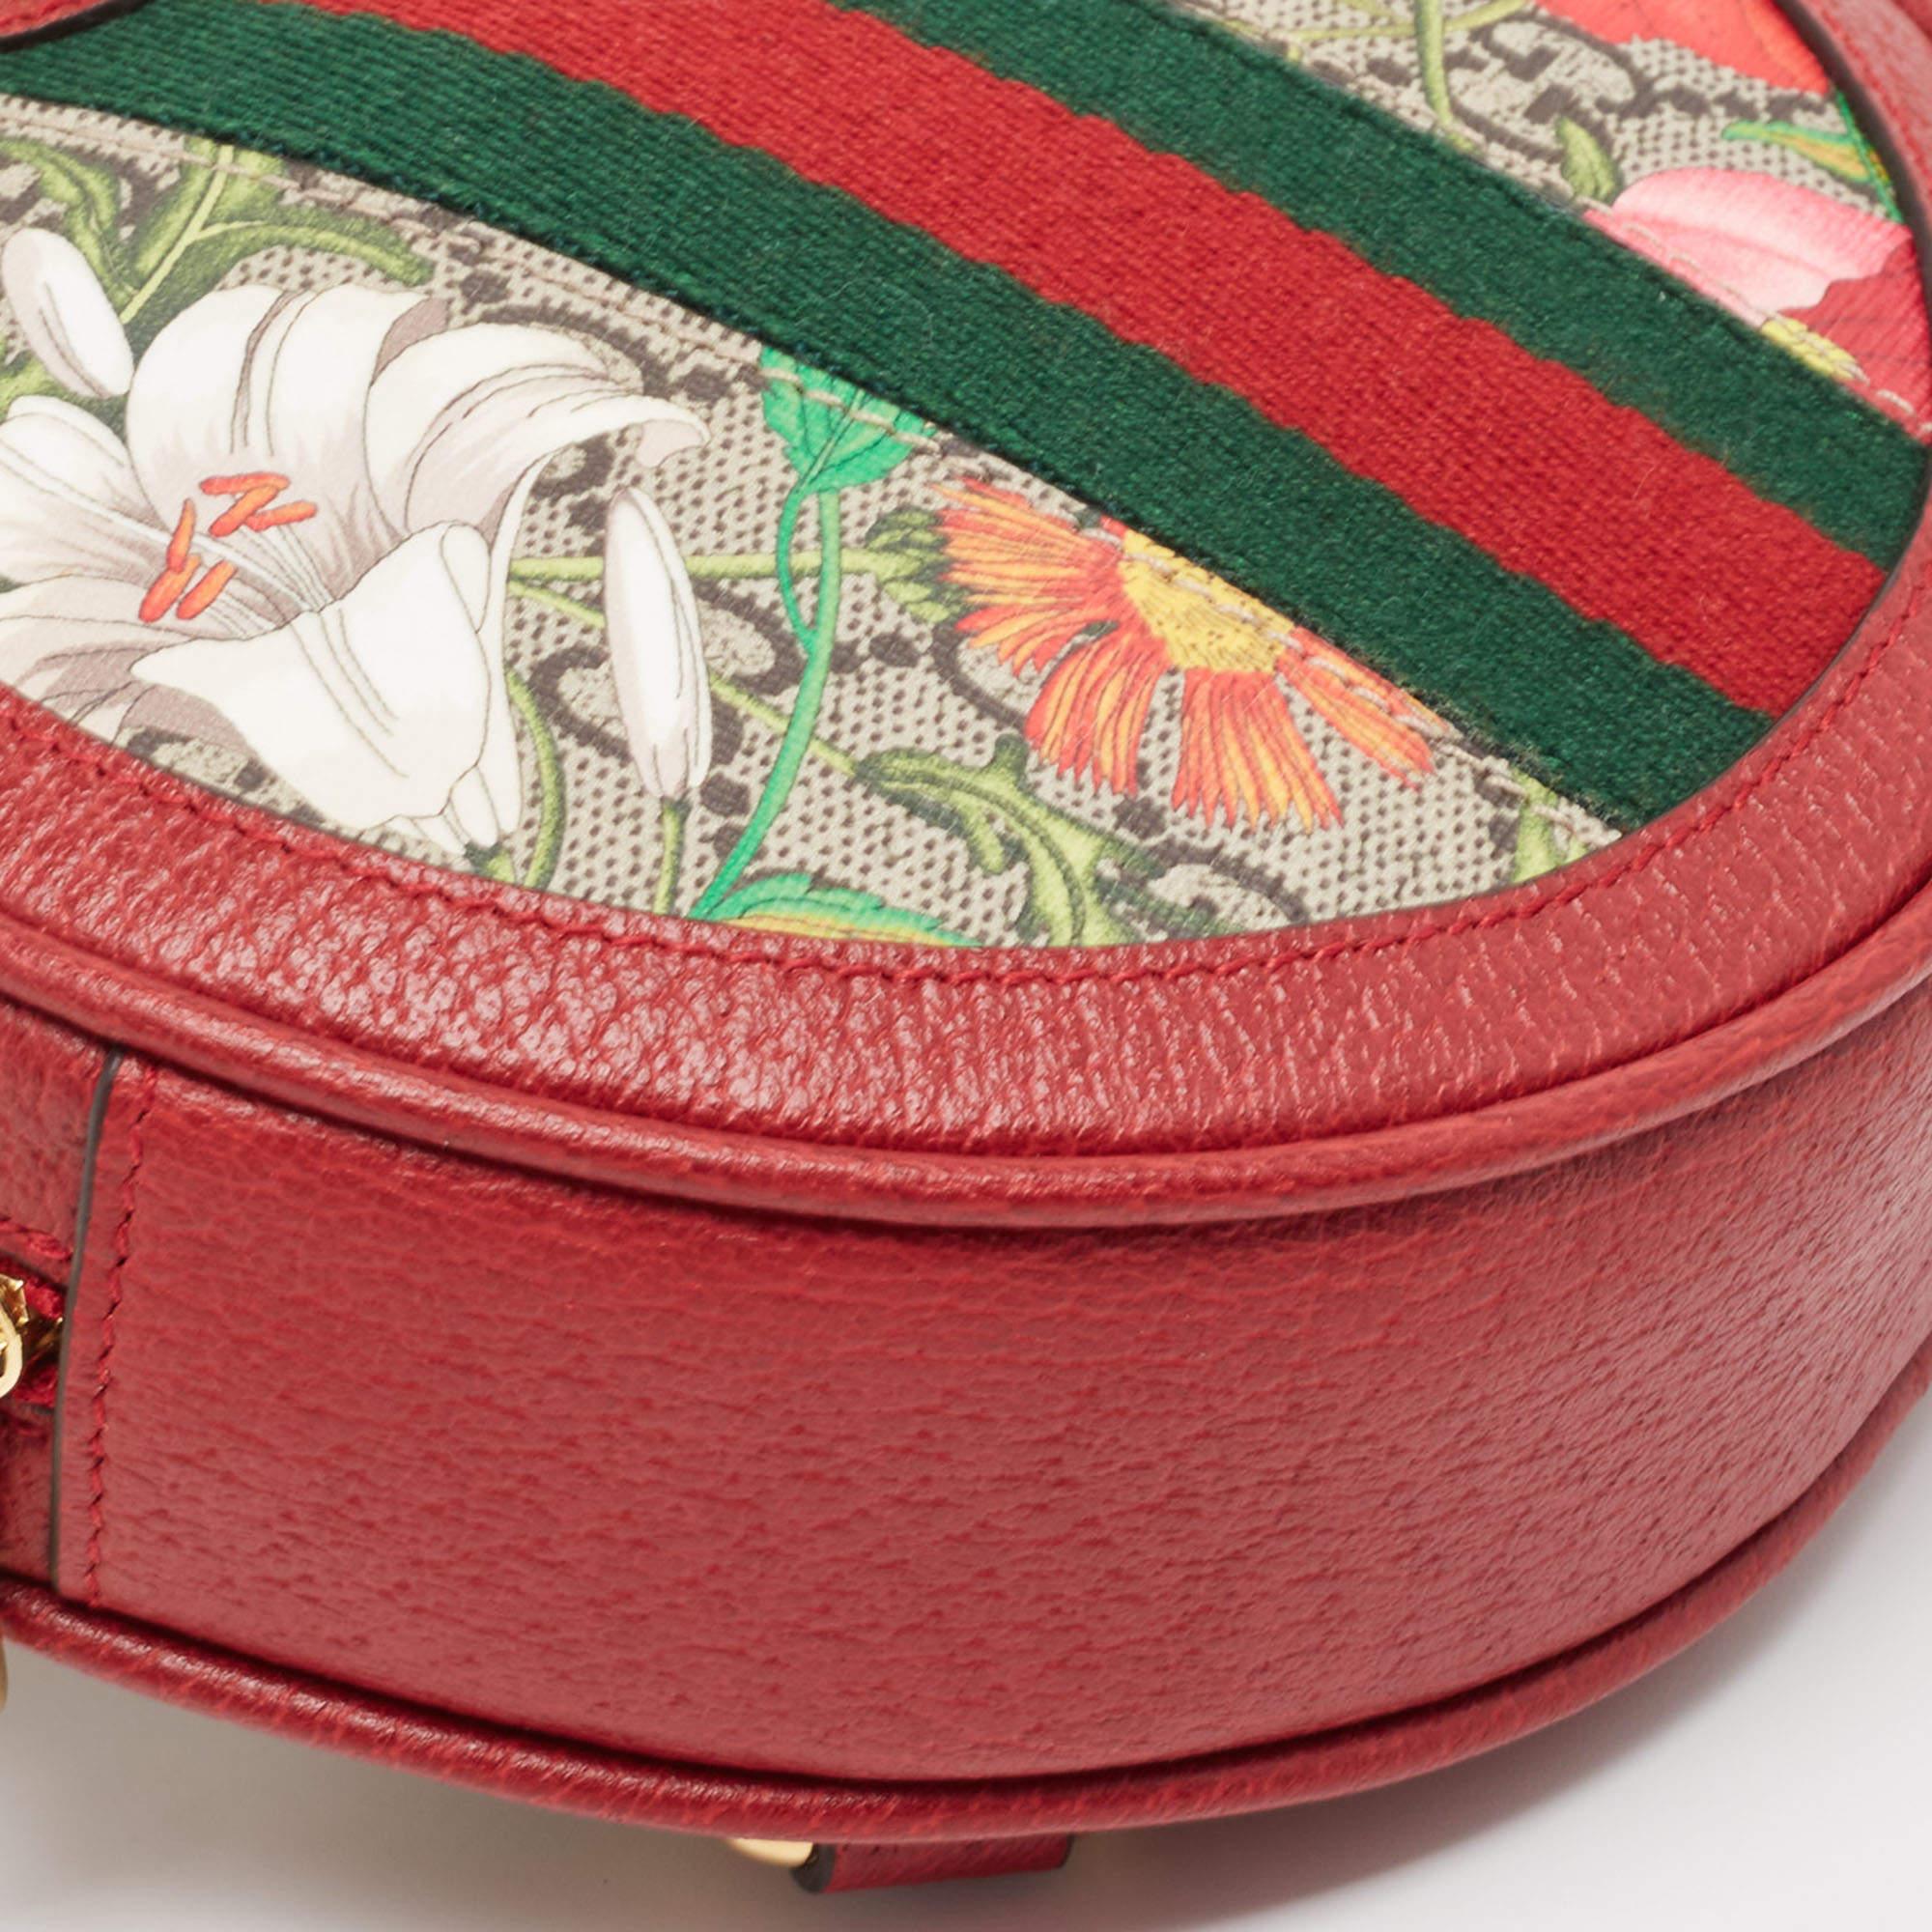 Women's Gucci Red GG Supreme Canvas and Leather Floral Ophidia Backpack